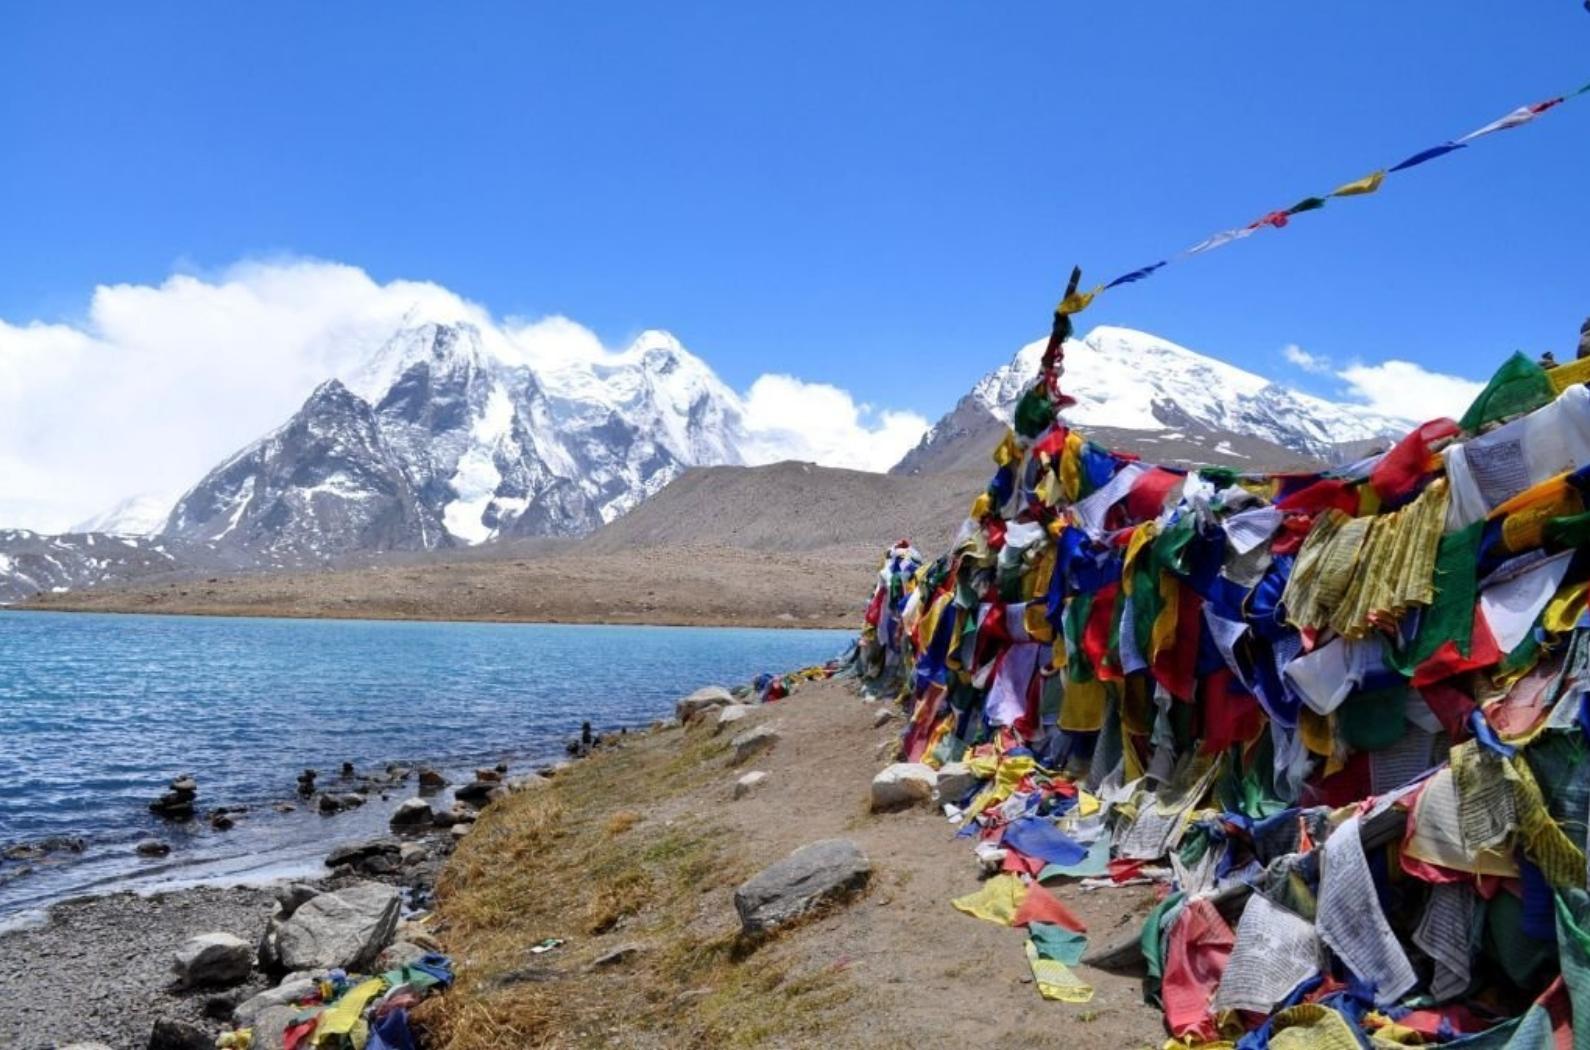 Buddhist prayer flags add color to the scenic landscape of Gurudongmar lake in Lachen.